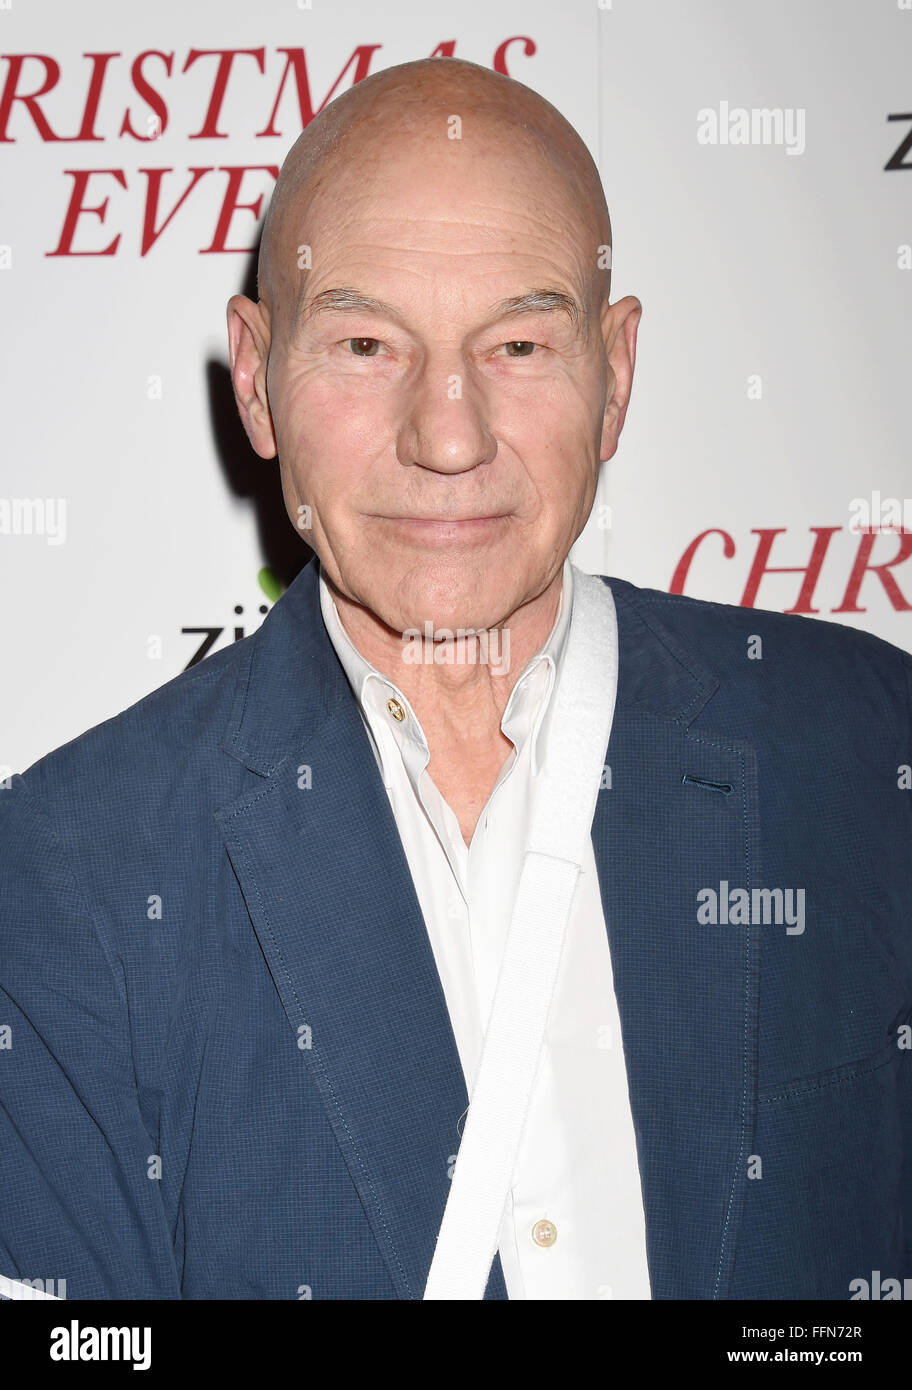 Actor Patrick Stewart arrives at the premiere of Unstuck's 'Christmas Eve' at the ArcLight Hollywood on December 2, 2015 in Hollywood, California., Stock Photo